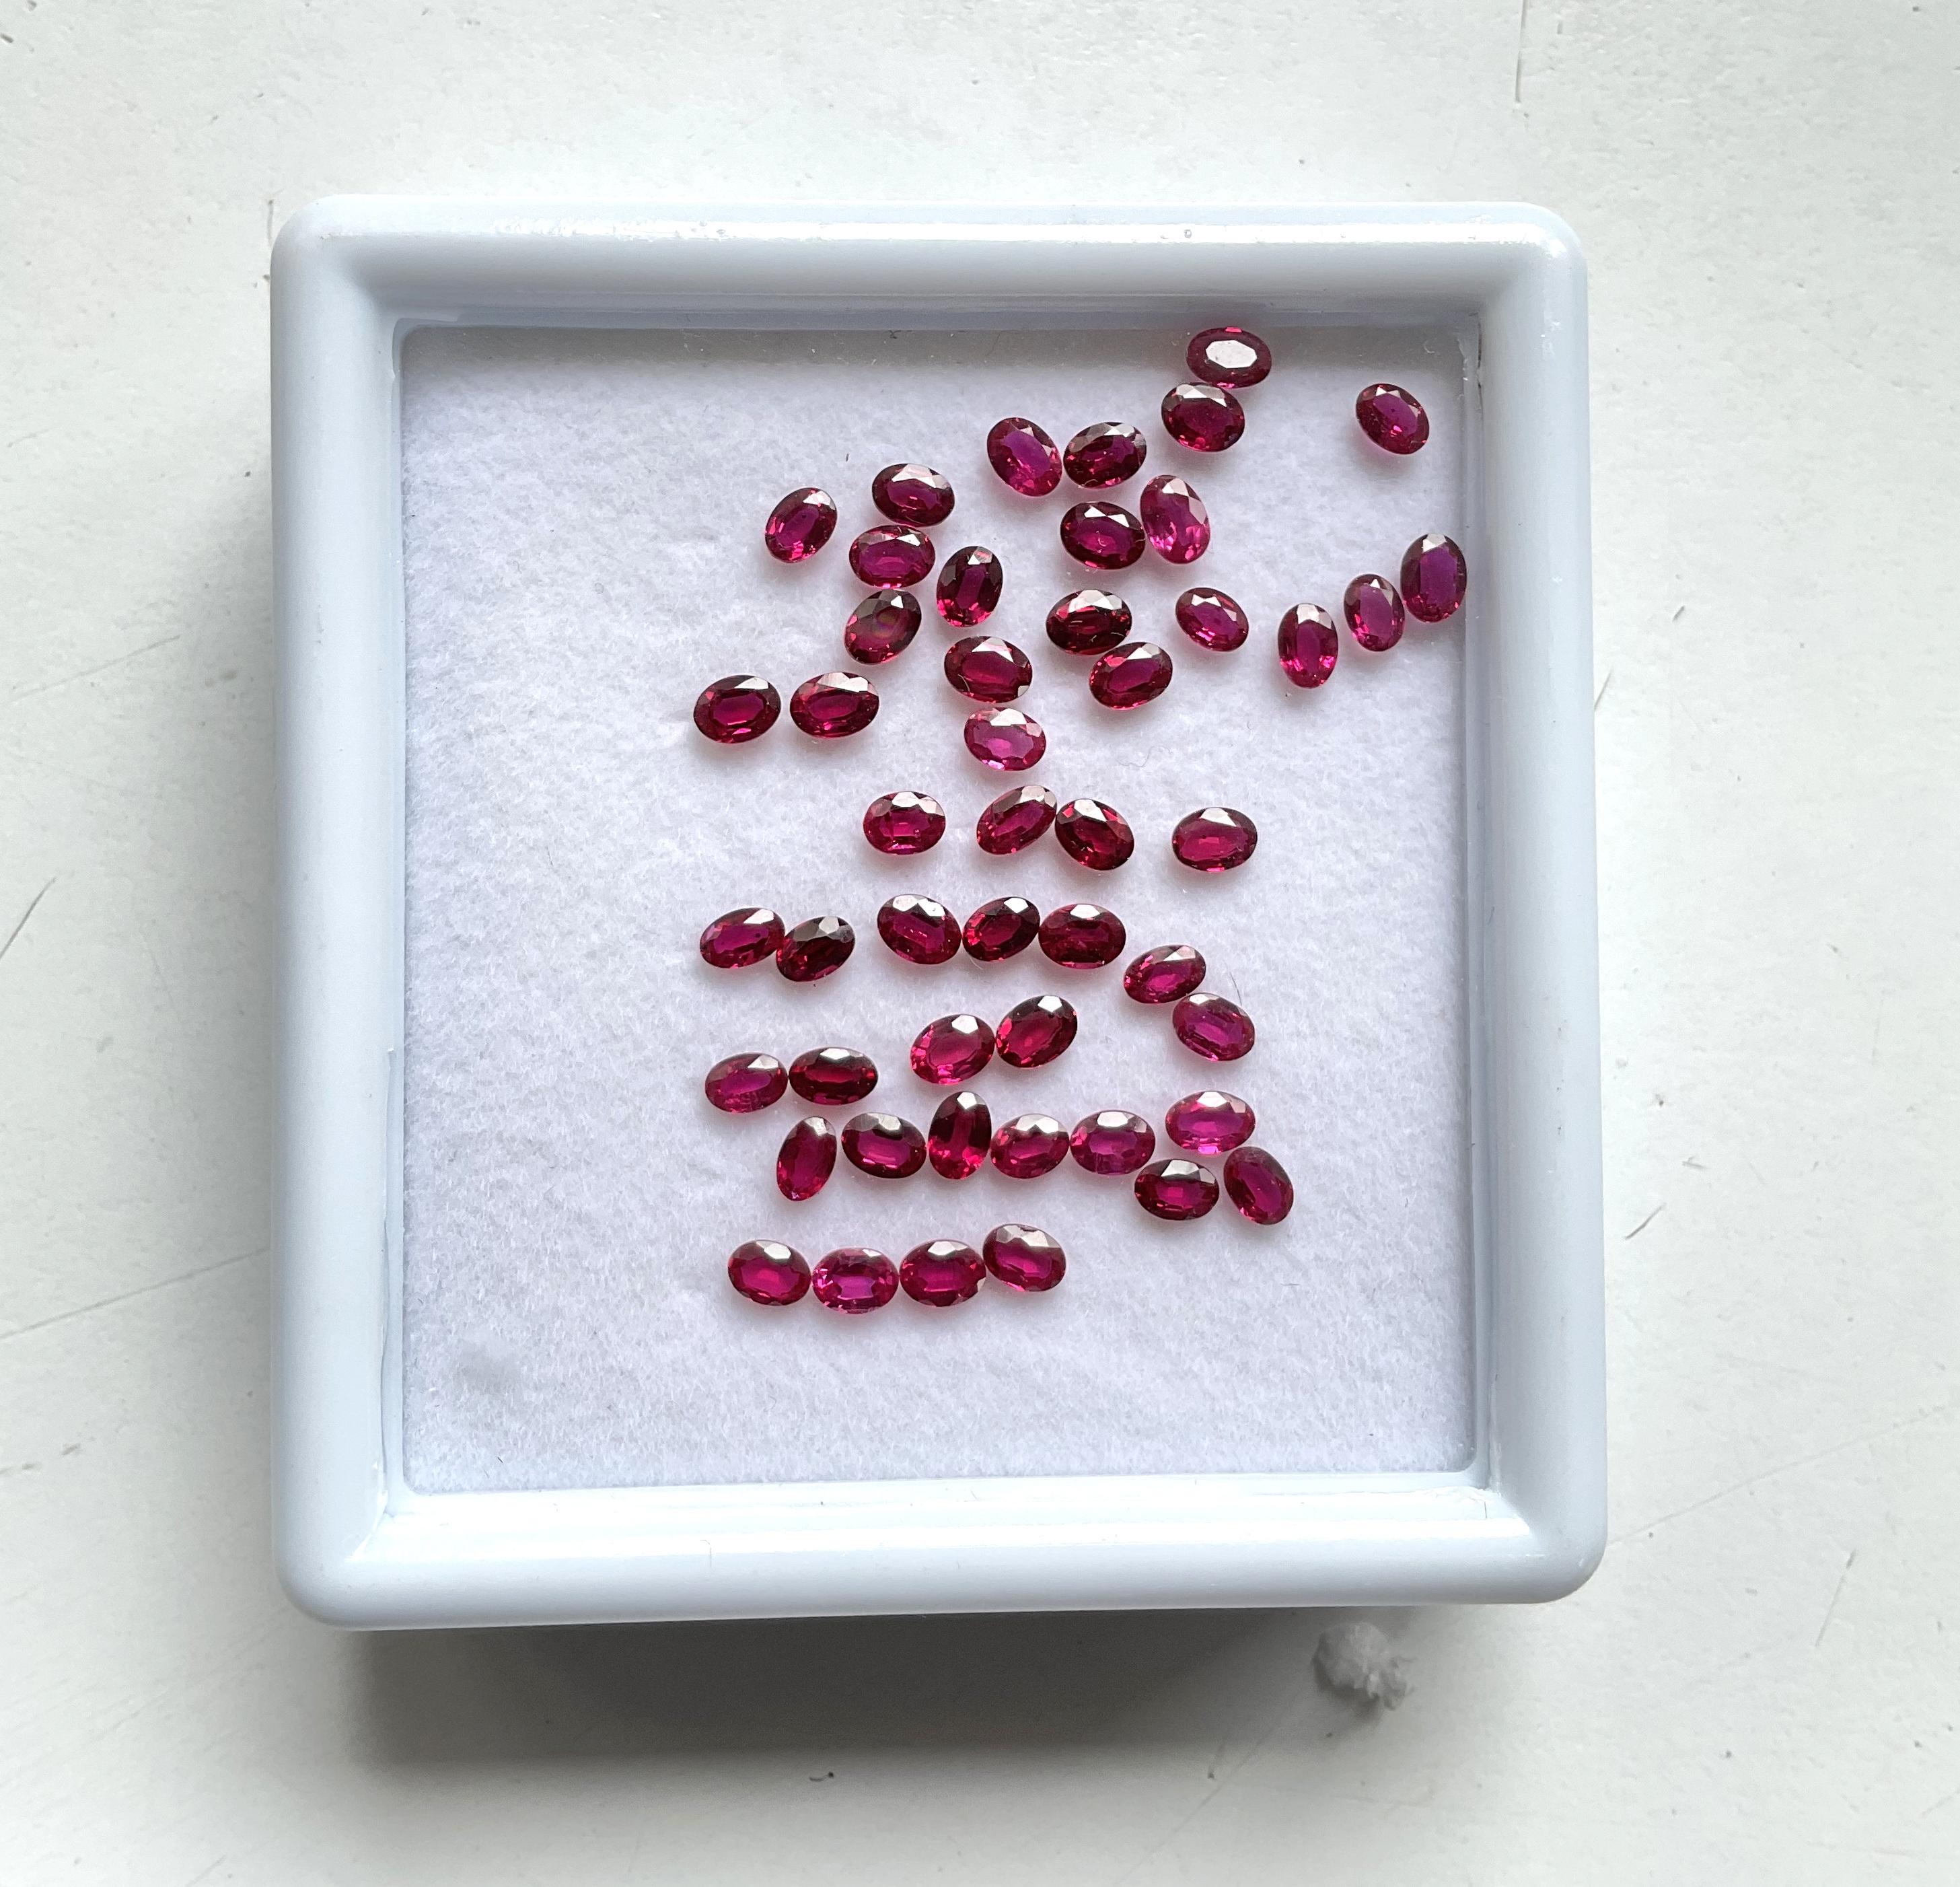 8.78 Carats Mozambique Ruby Top Quality Oval Cut stone No Heat Natural Gemstone

Weight: 8.78 Carats
Size: 4x3 MM
Pieces: 49 piece
Shape:  oval cut stone